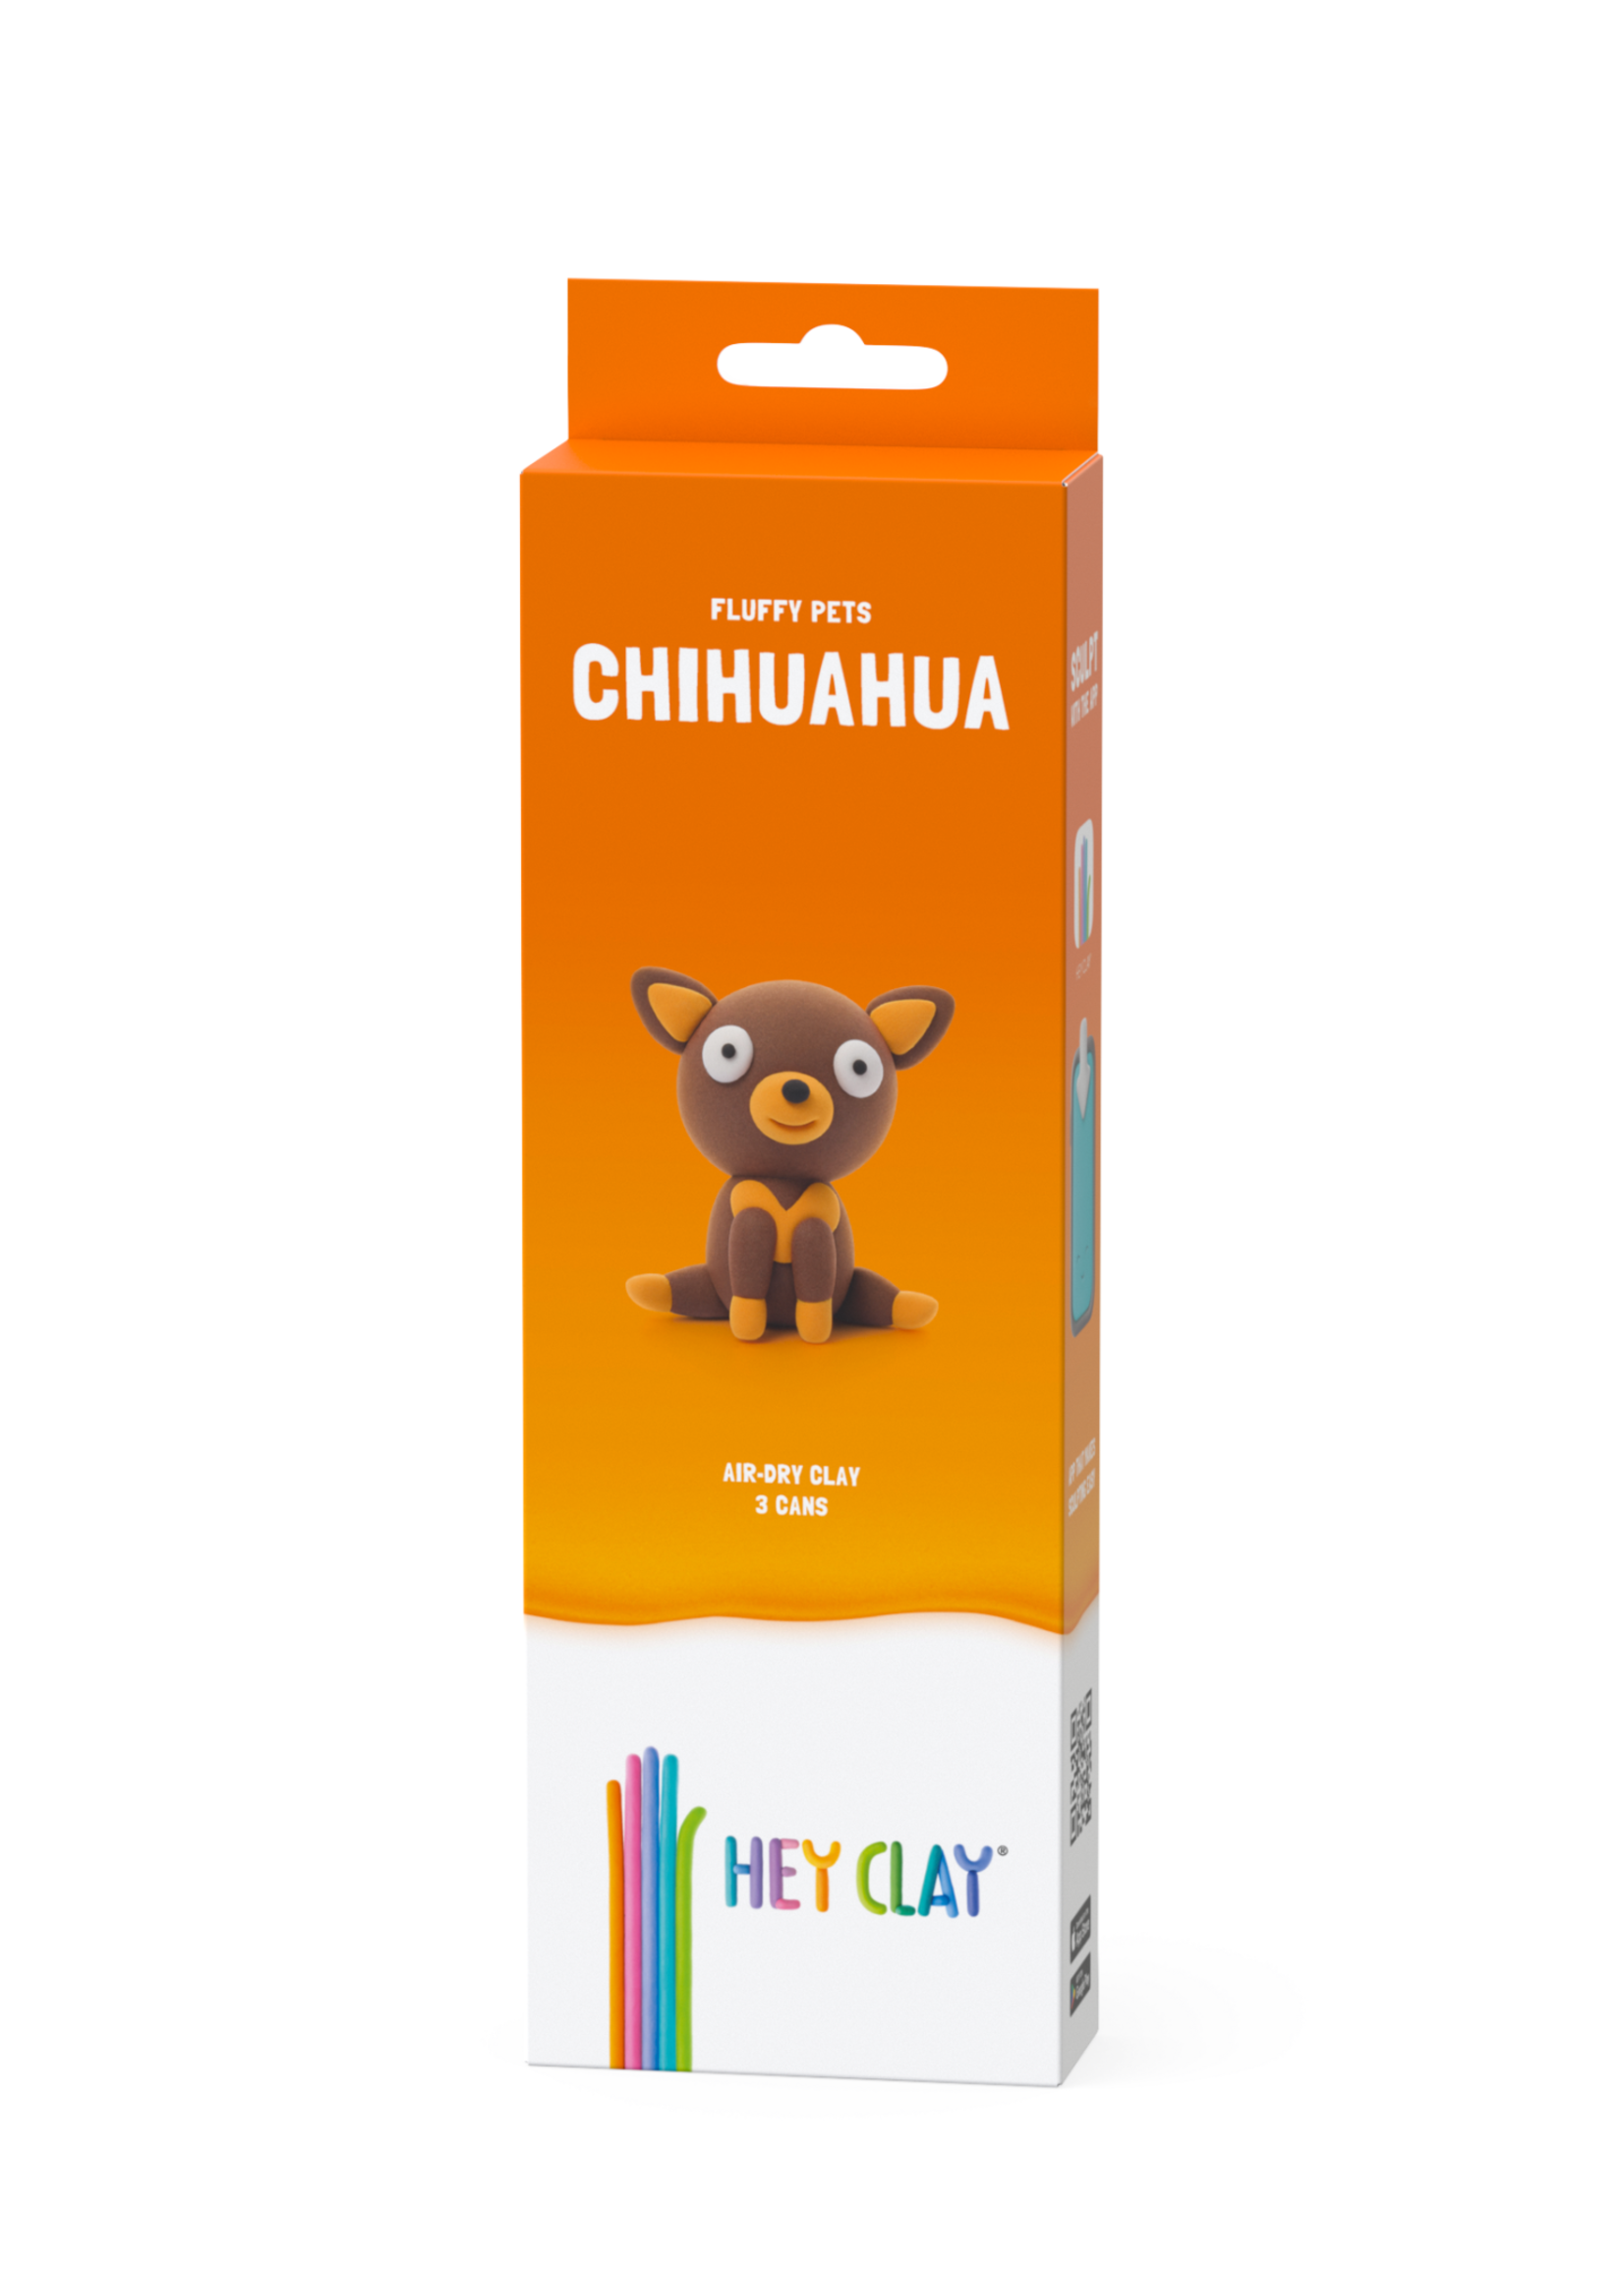 Hey Clay- Fluffy Pets Chihuahua 3 cans